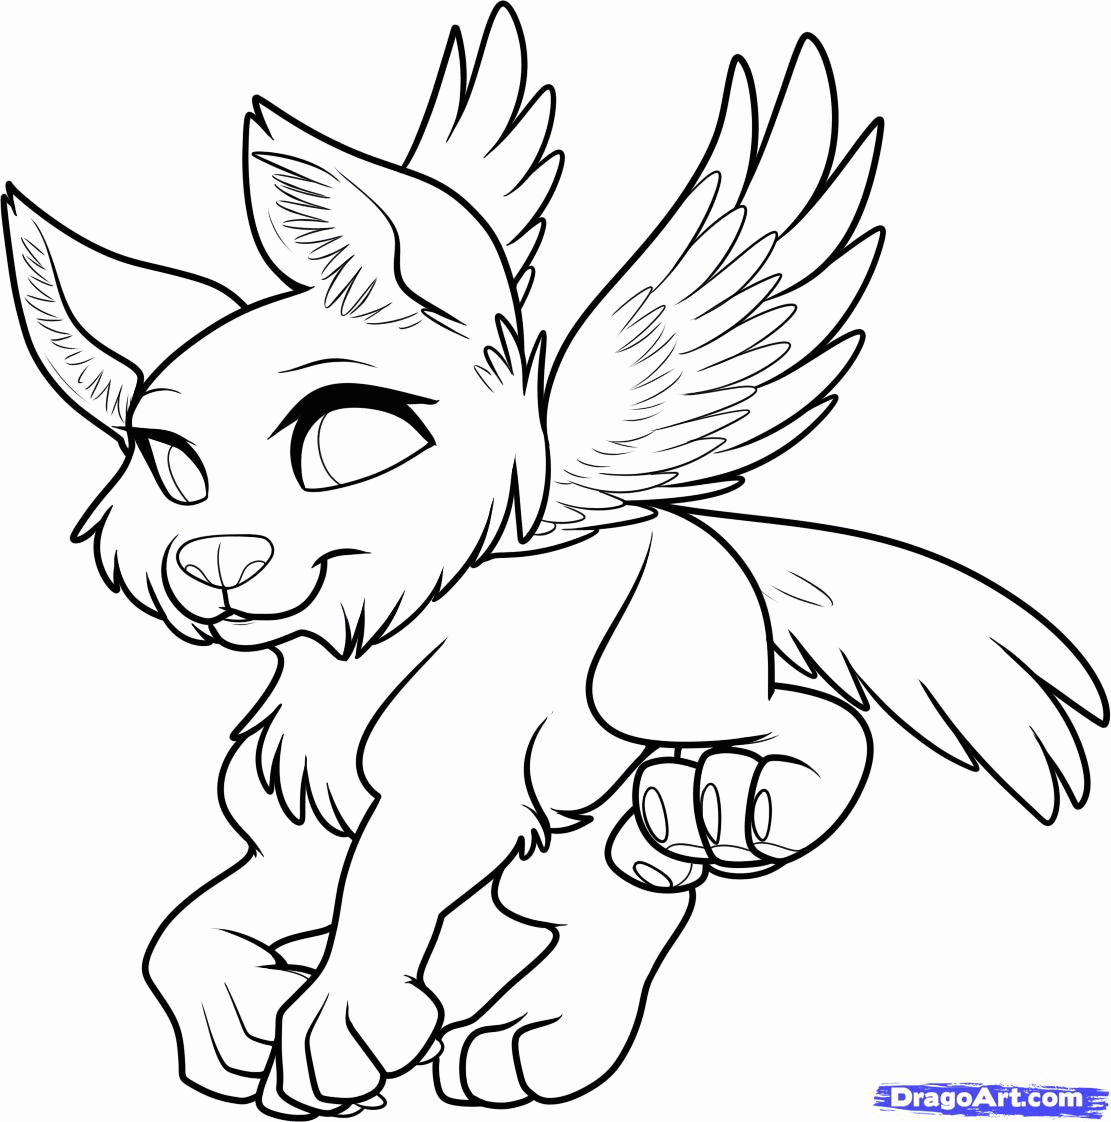 11 Pics Of Cute Winged Wolf Coloring Pages Wolves